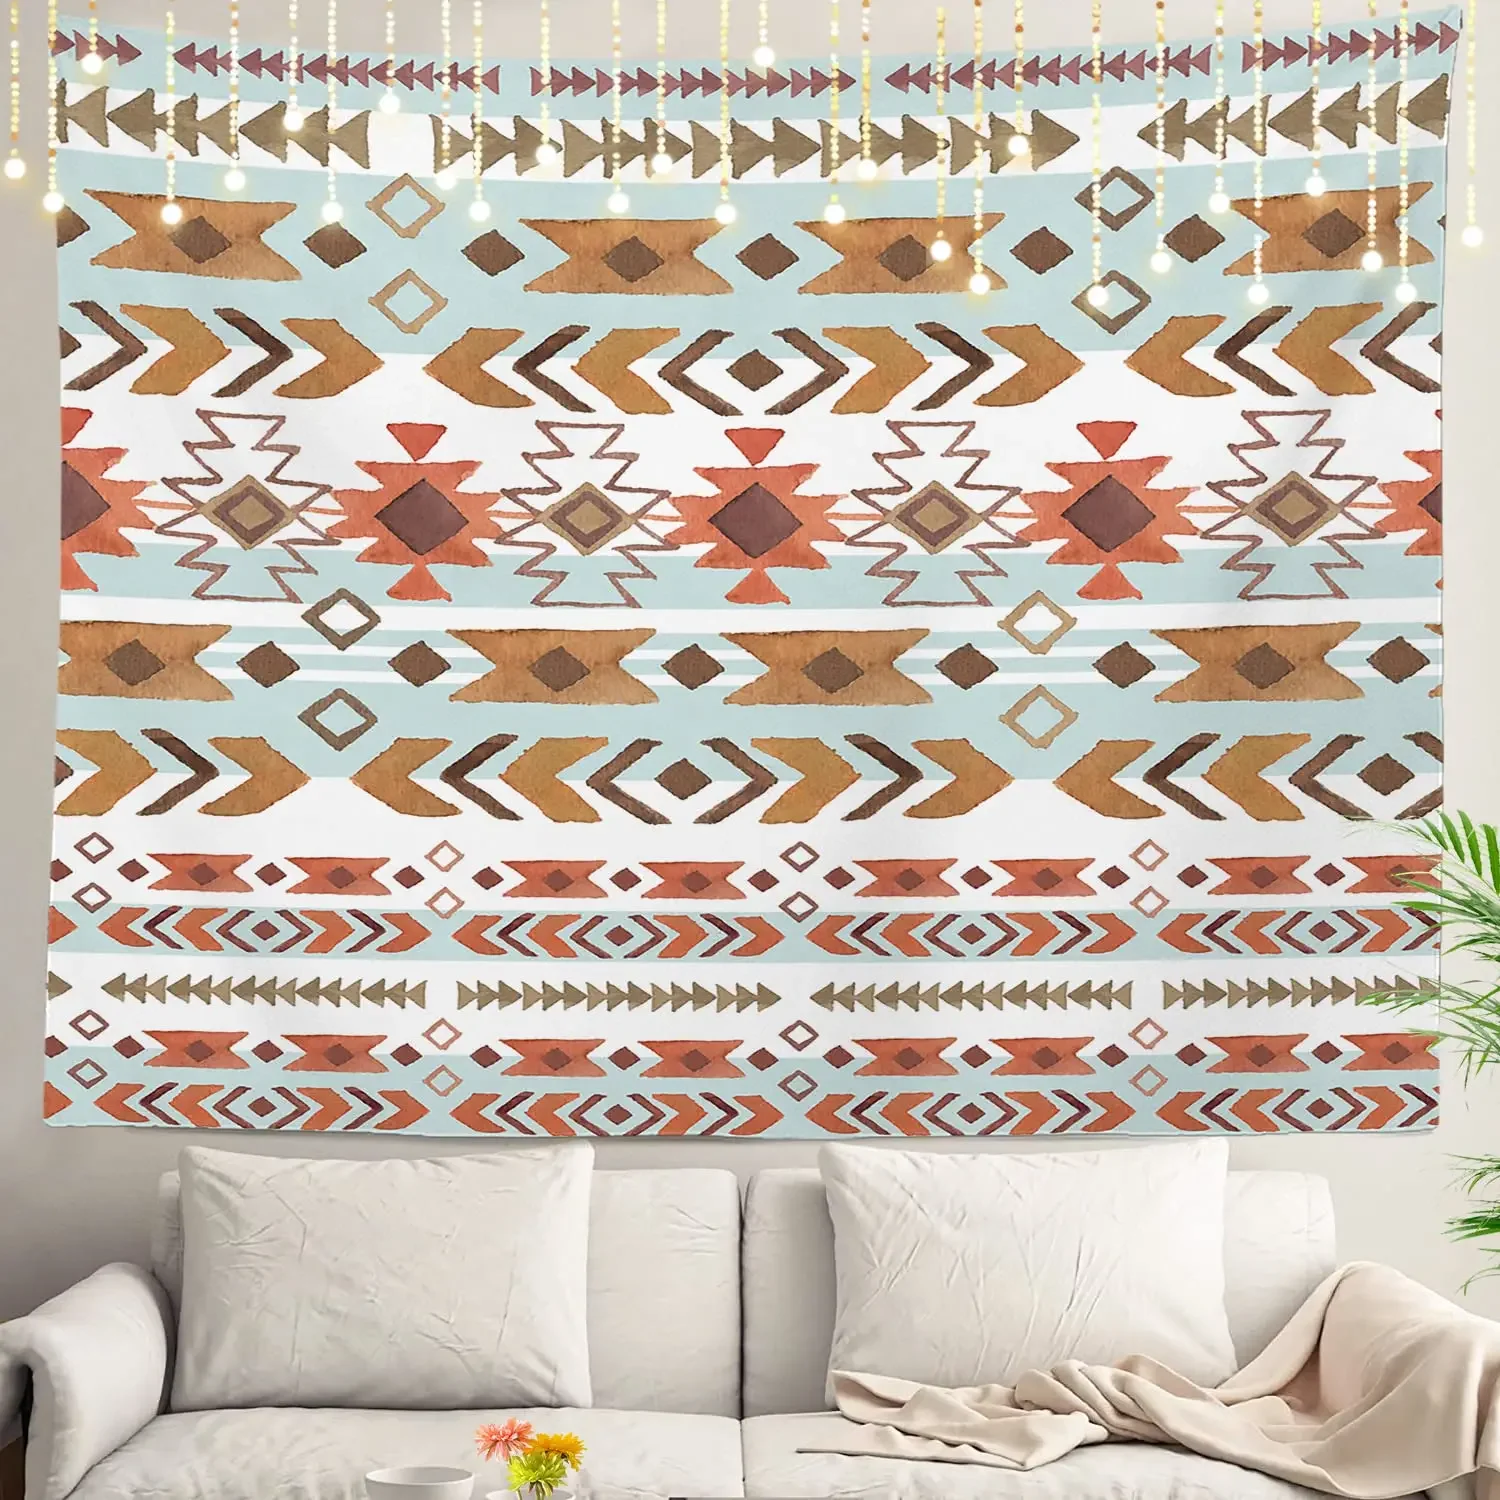 

Aztec Tapestry Native Tribal Navajo American Ethnic Abstract Geometric Vintage Tapestry Wall Hanging for Living Room Bedroom